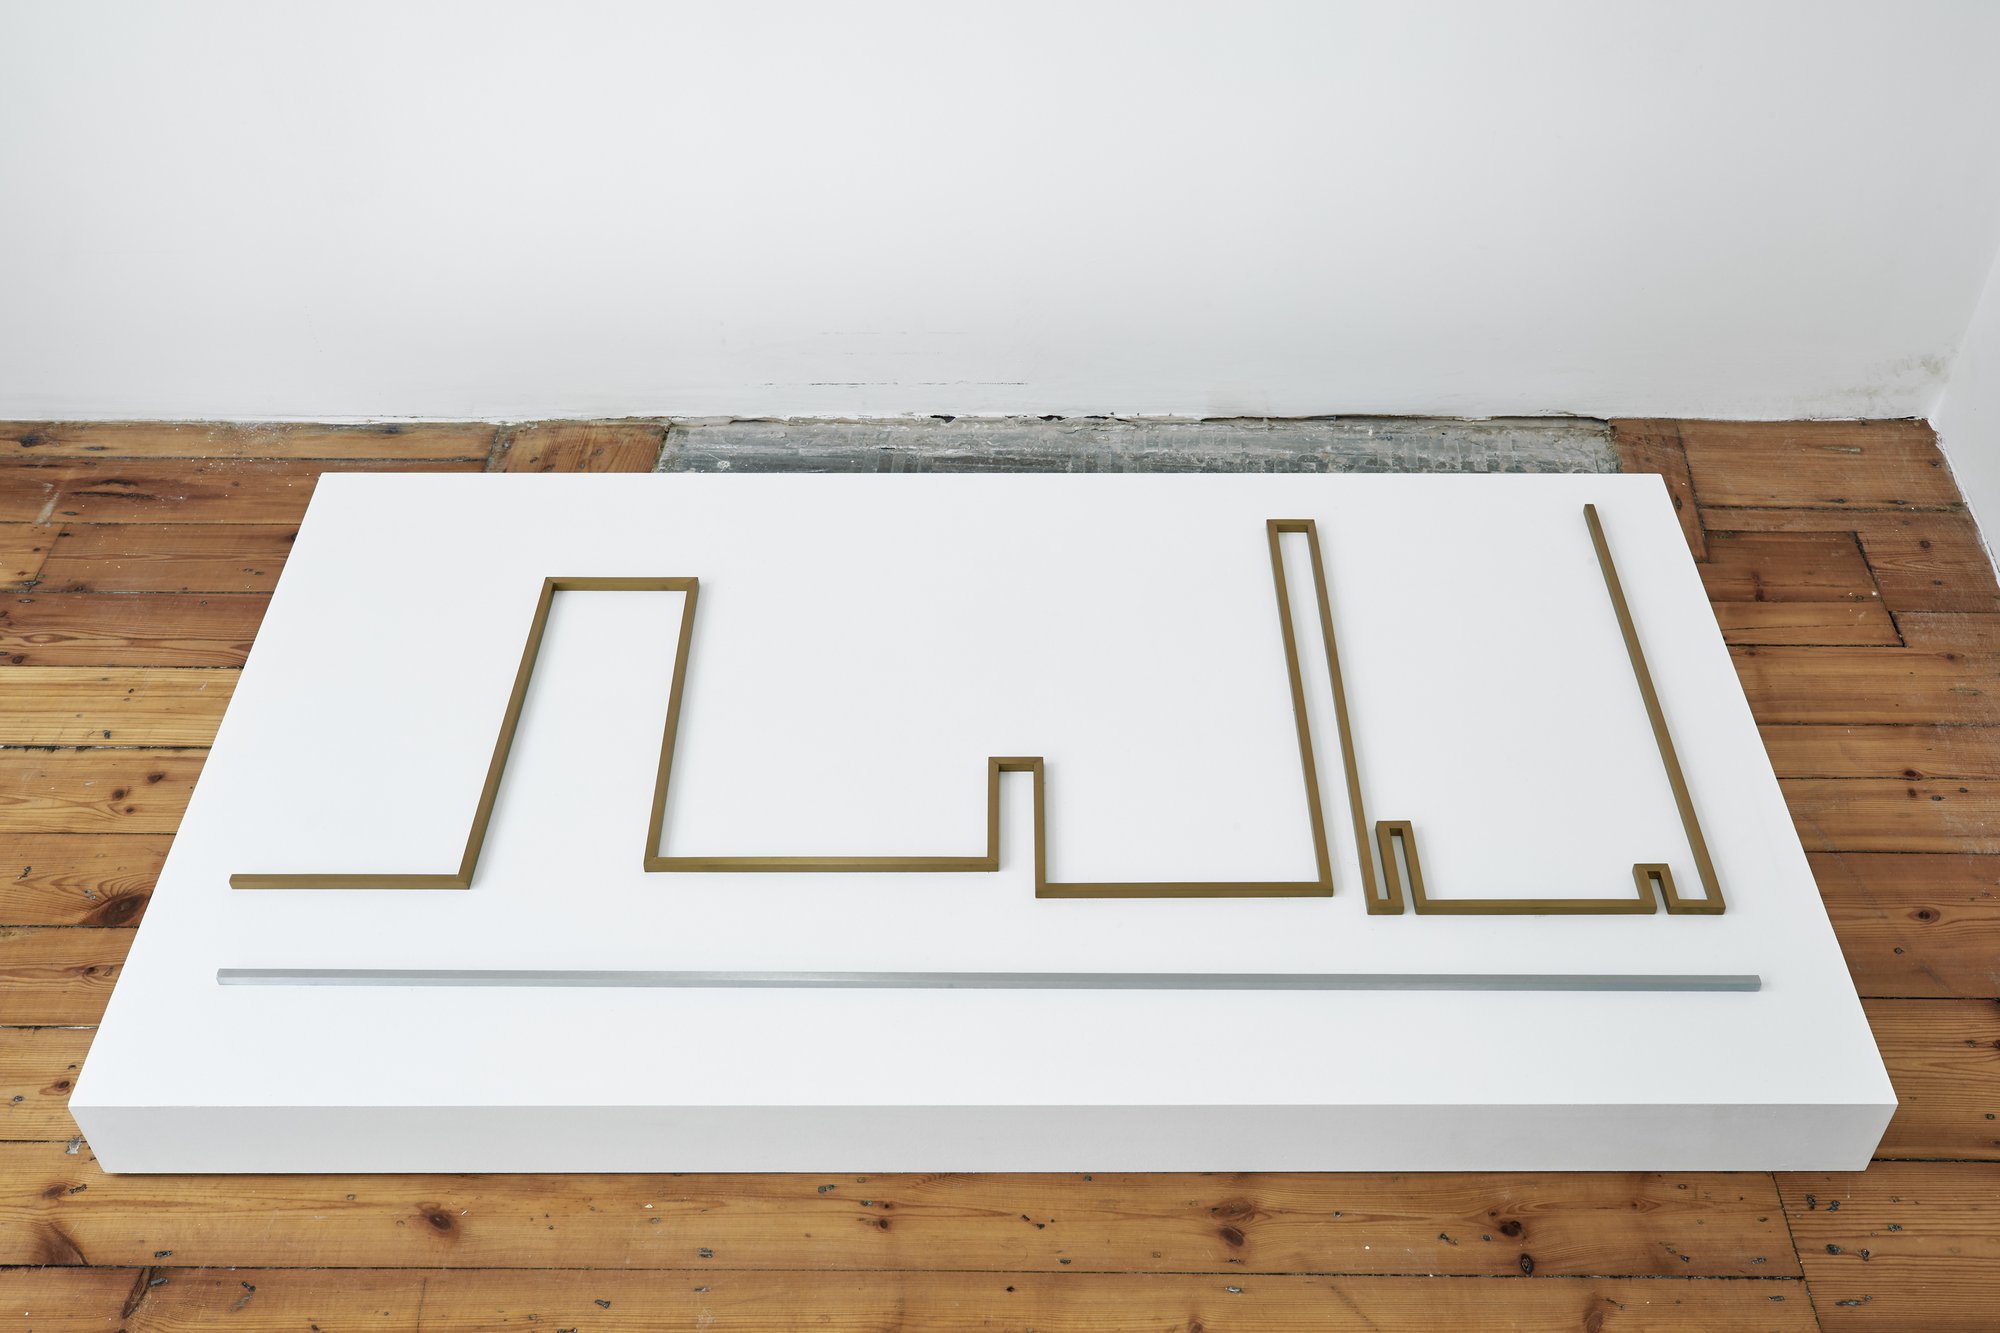 Iman Issa, Seduction (study for 2014), bronze and aluminum sculpture, text panel under glass, white plinth, sculpture: 62.5 x 124 cm (24 5/8 x 48 7/8 in), plinth: 9 x 140.5 x 80 cm (3 1/2 x 55 1/4 x 31 1/2 in), 2014